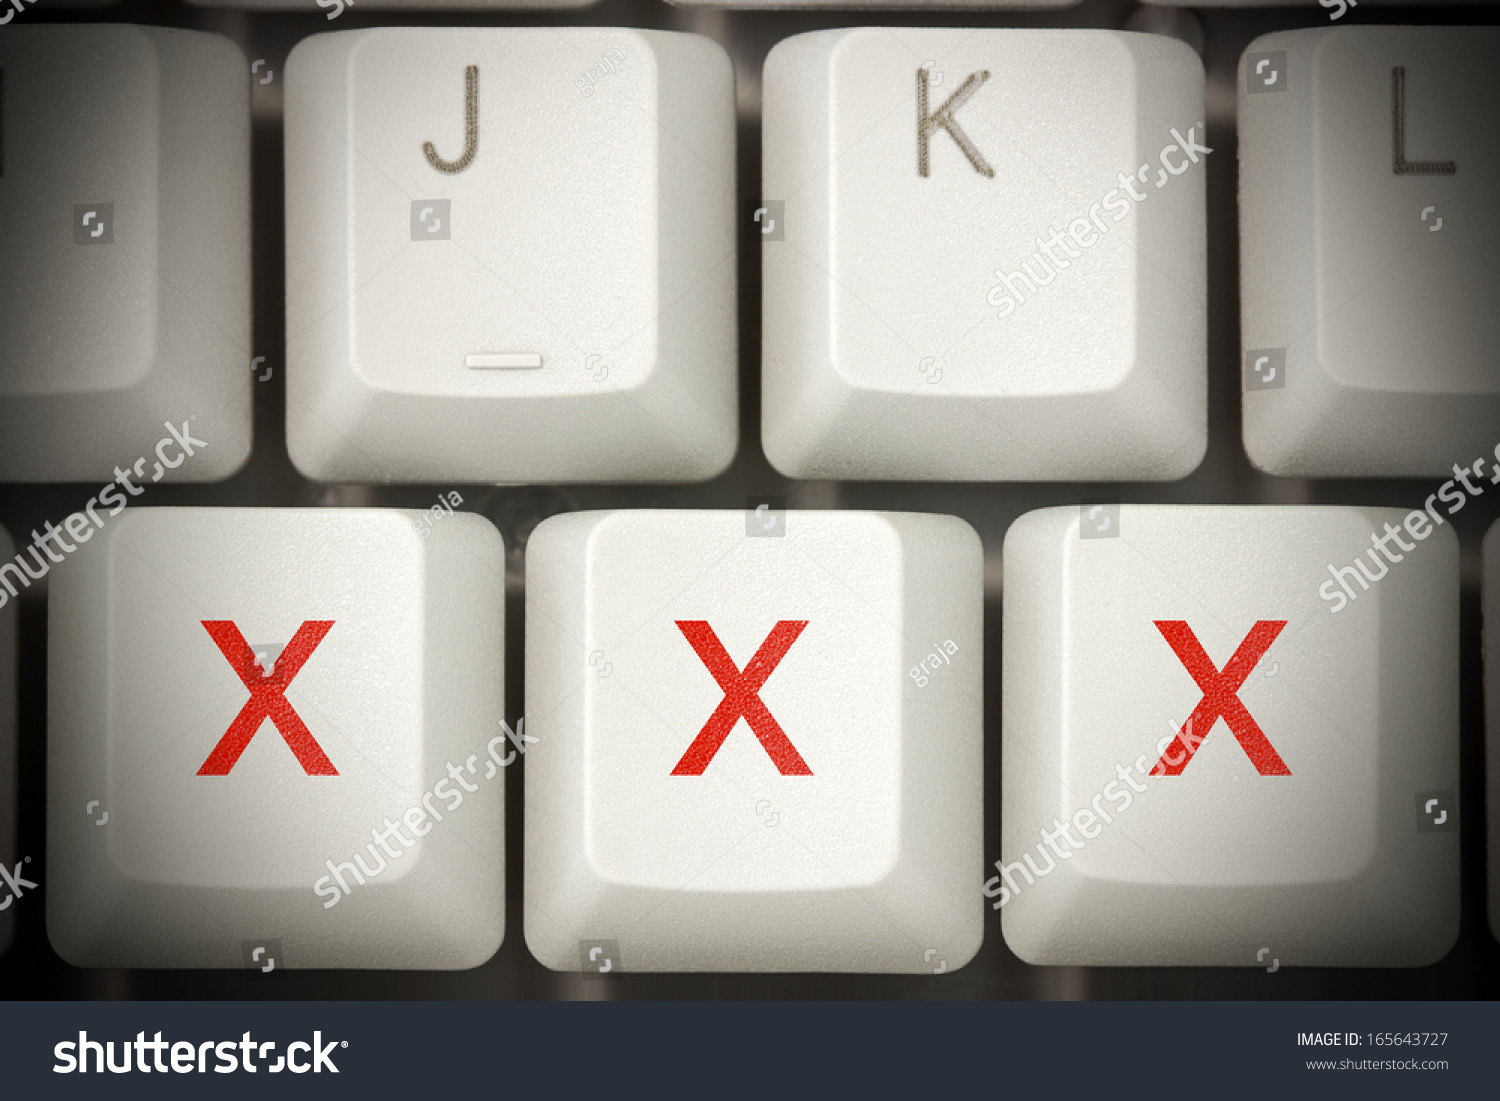 Online Porn Concept. Xxx Buttons On The Computer Keyboard Stock ...